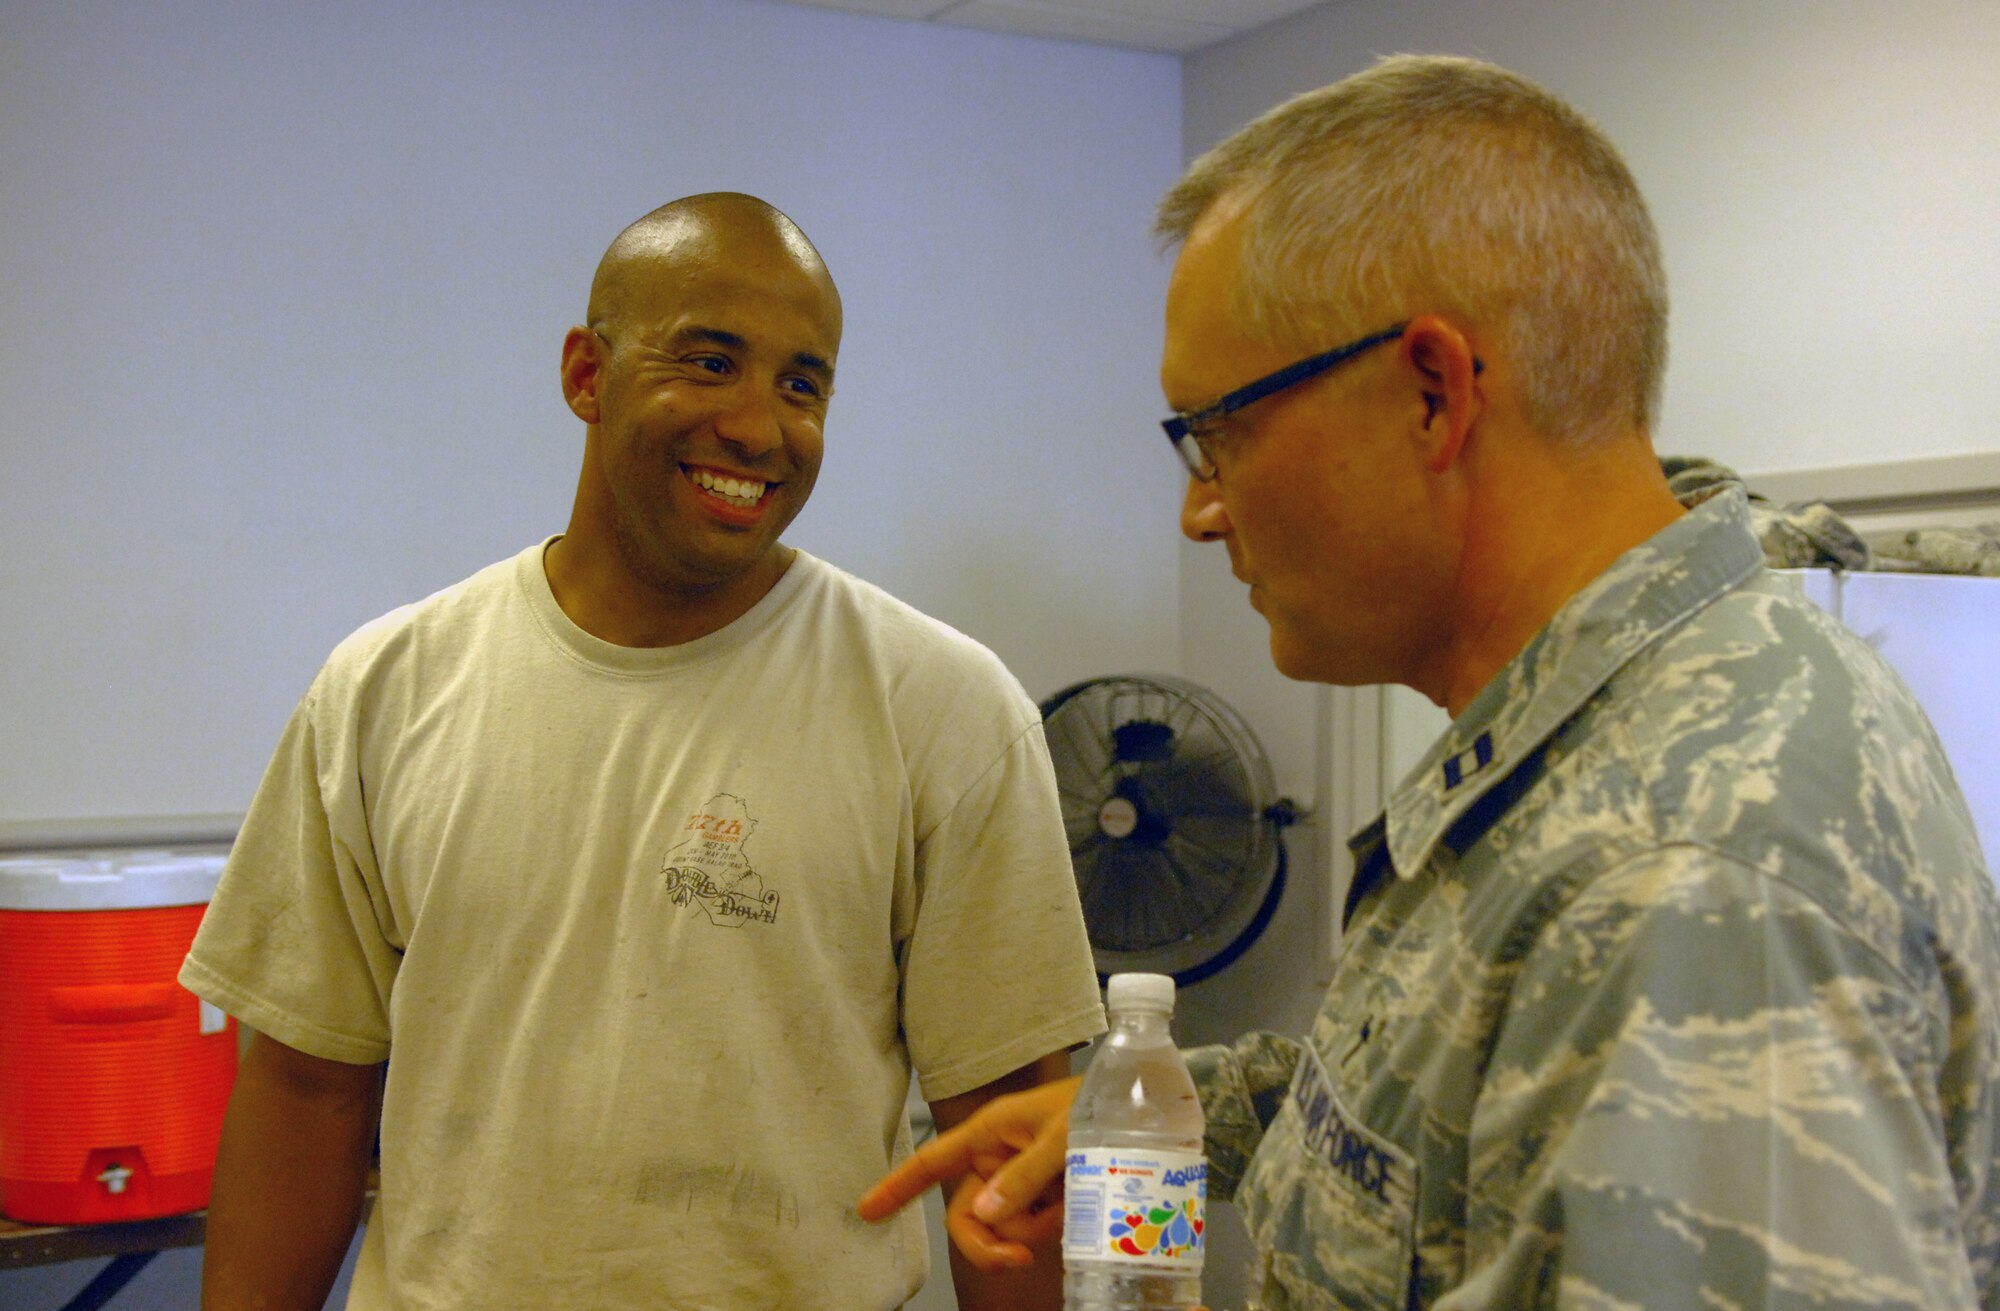 NELLIS AIR FORCE BASE, Nev. -- Chaplain (Capt.) David Knight, 20th Fighter Wing and Air Expeditionary Wing chaplain, talks with Airman 1st Class Garrett Clark, 77th Aircraft Maintenance Unit, at Red Flag 10-4 July 27, 2010.The chaplain team went around to the various units here during Red Flag passing out drinks and popsicles and chatting with the troops to help boost morale. (U.S. Air Force photo by Airman 1st Class Daniel Phelps)